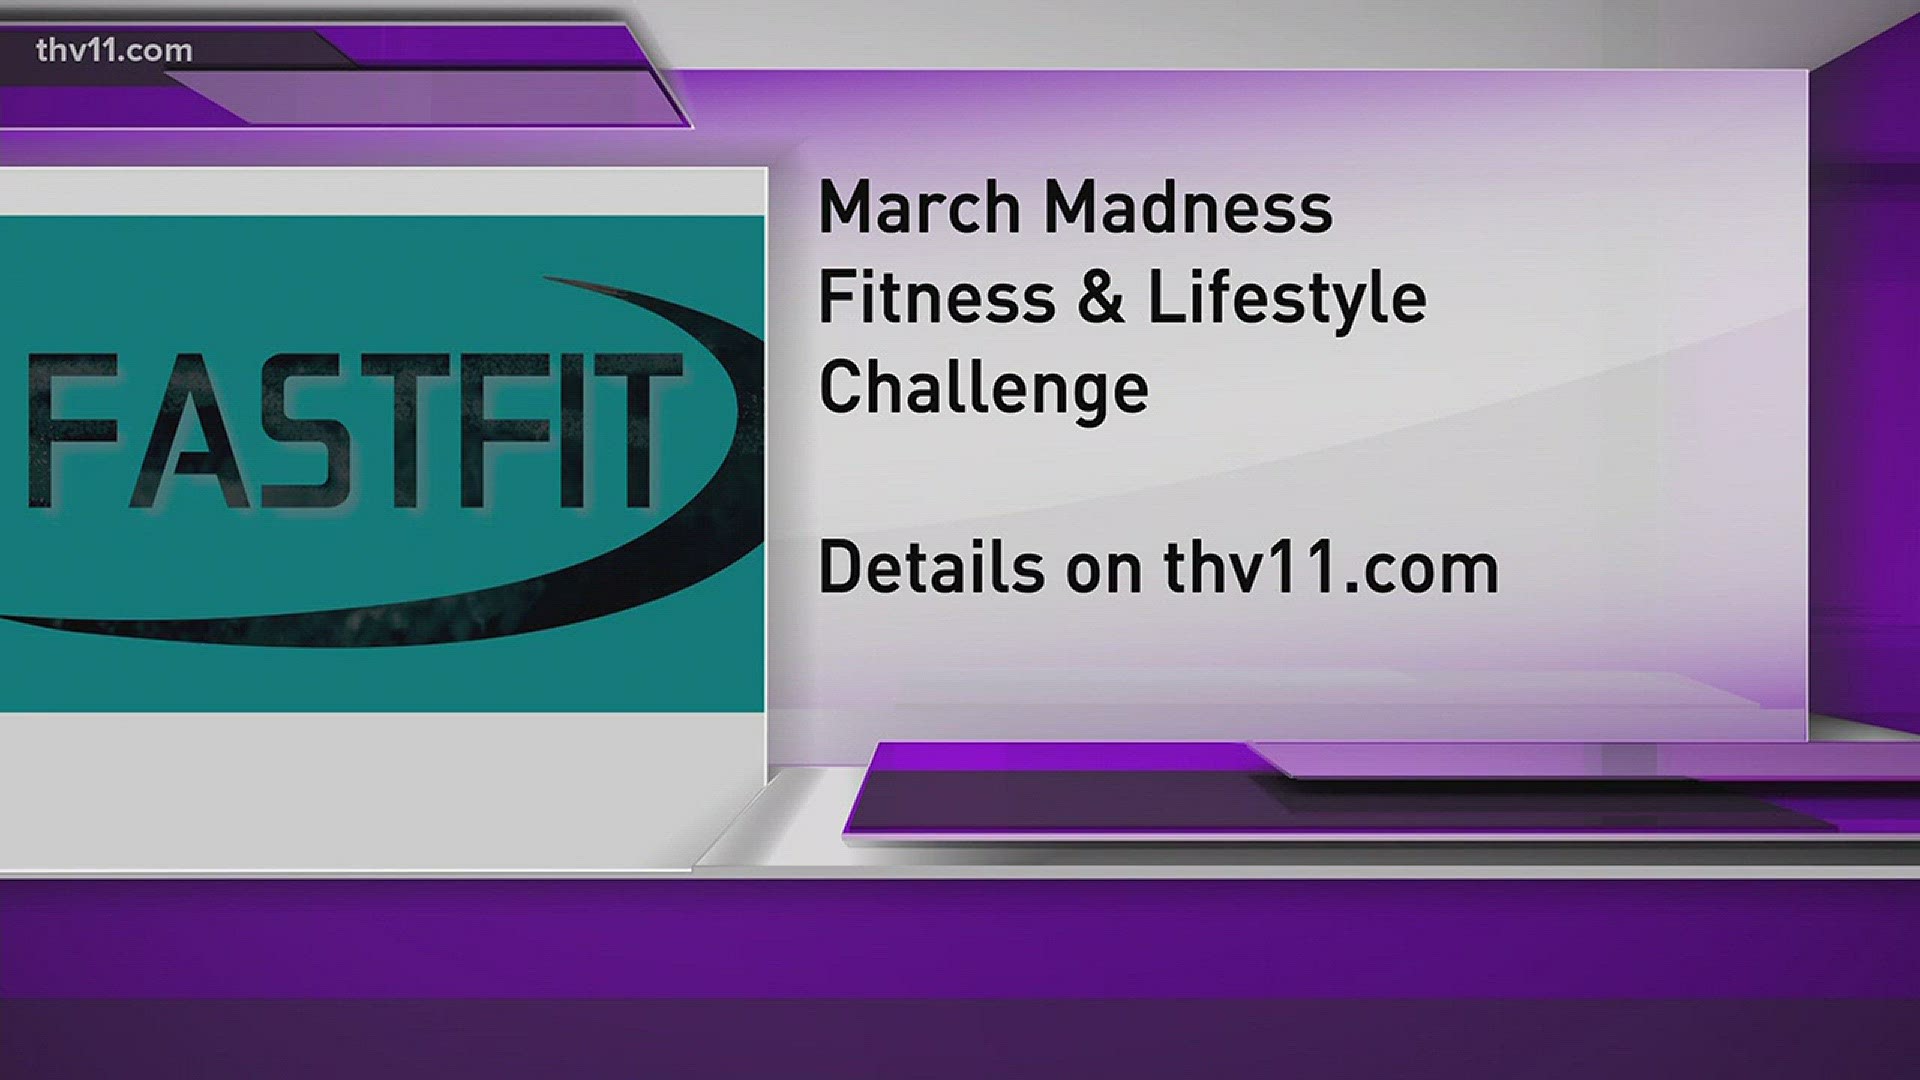 Jeff McDaniel from Fast Fit joined THV11 This Morning to challenge us to be our best selves.